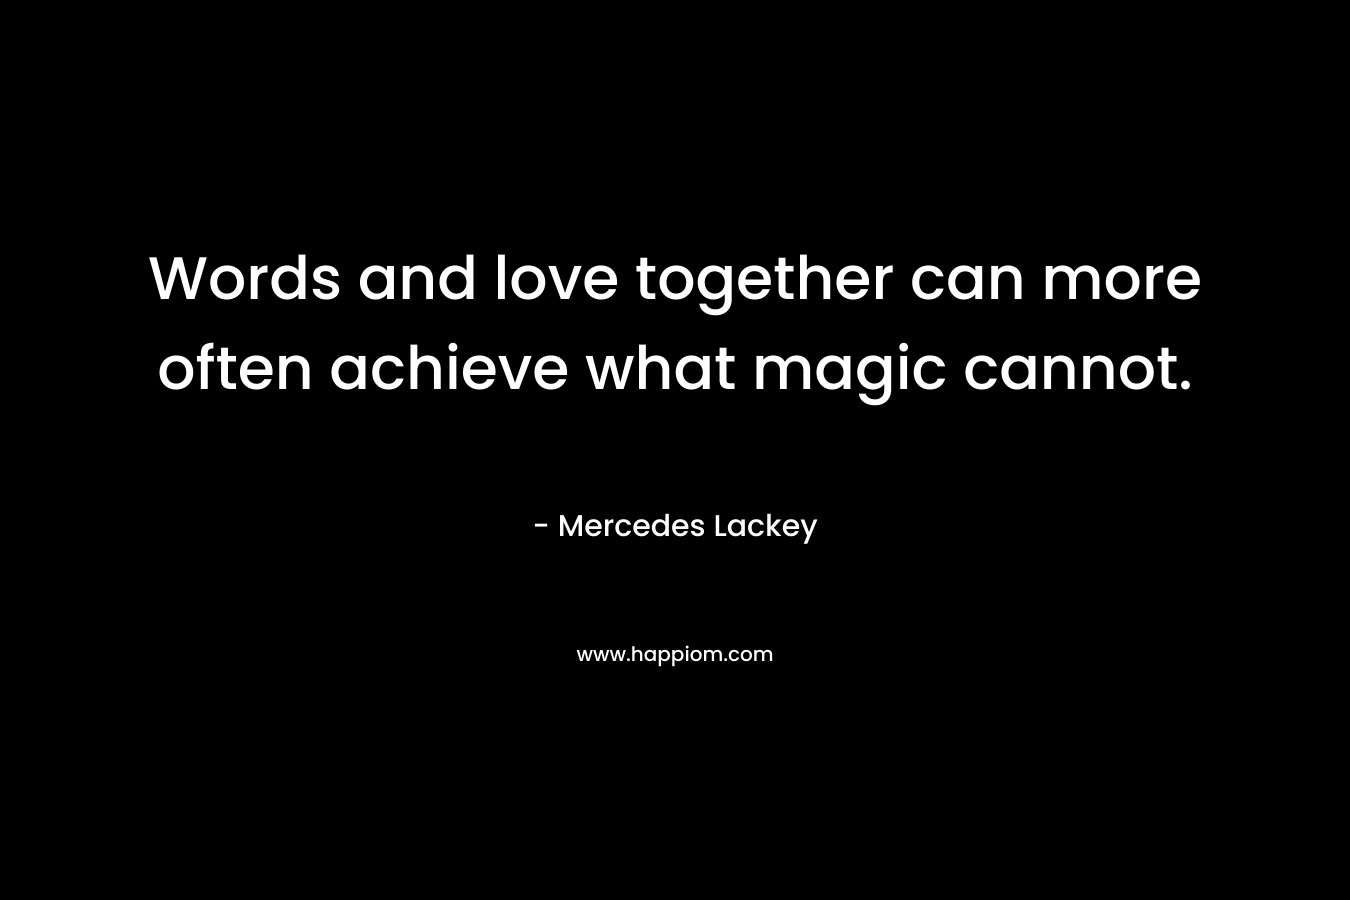 Words and love together can more often achieve what magic cannot.